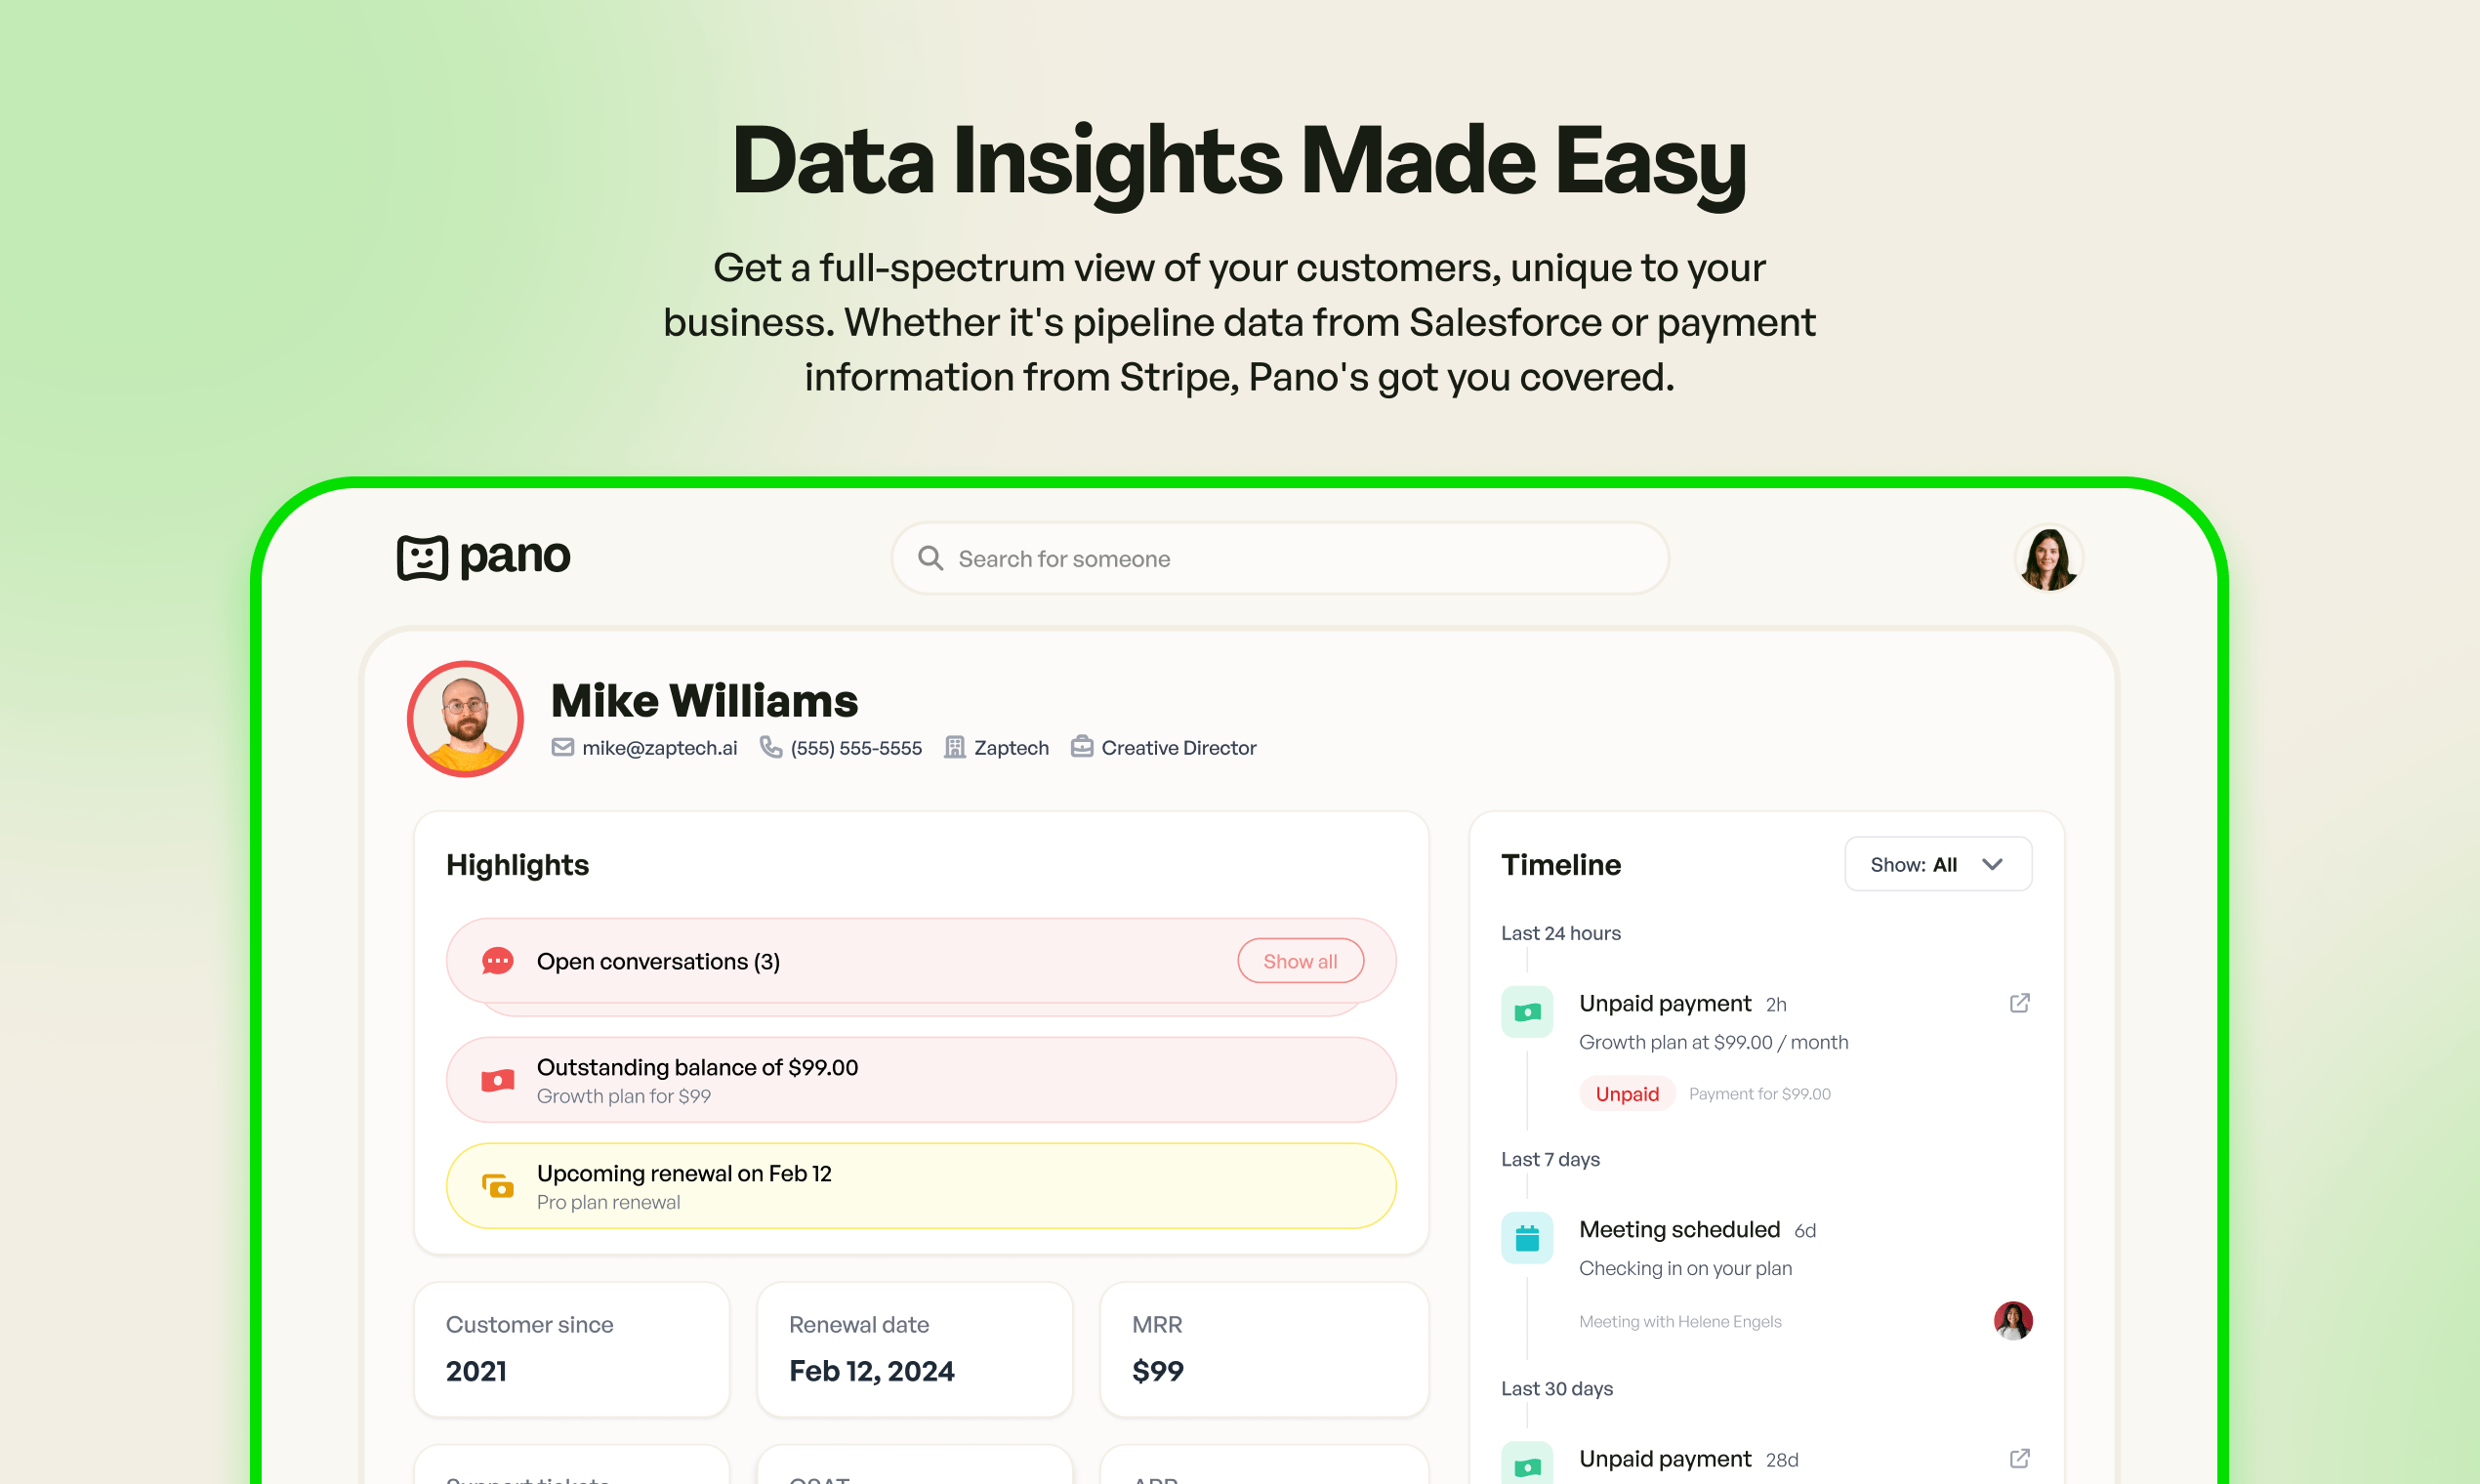 Data insights made easy